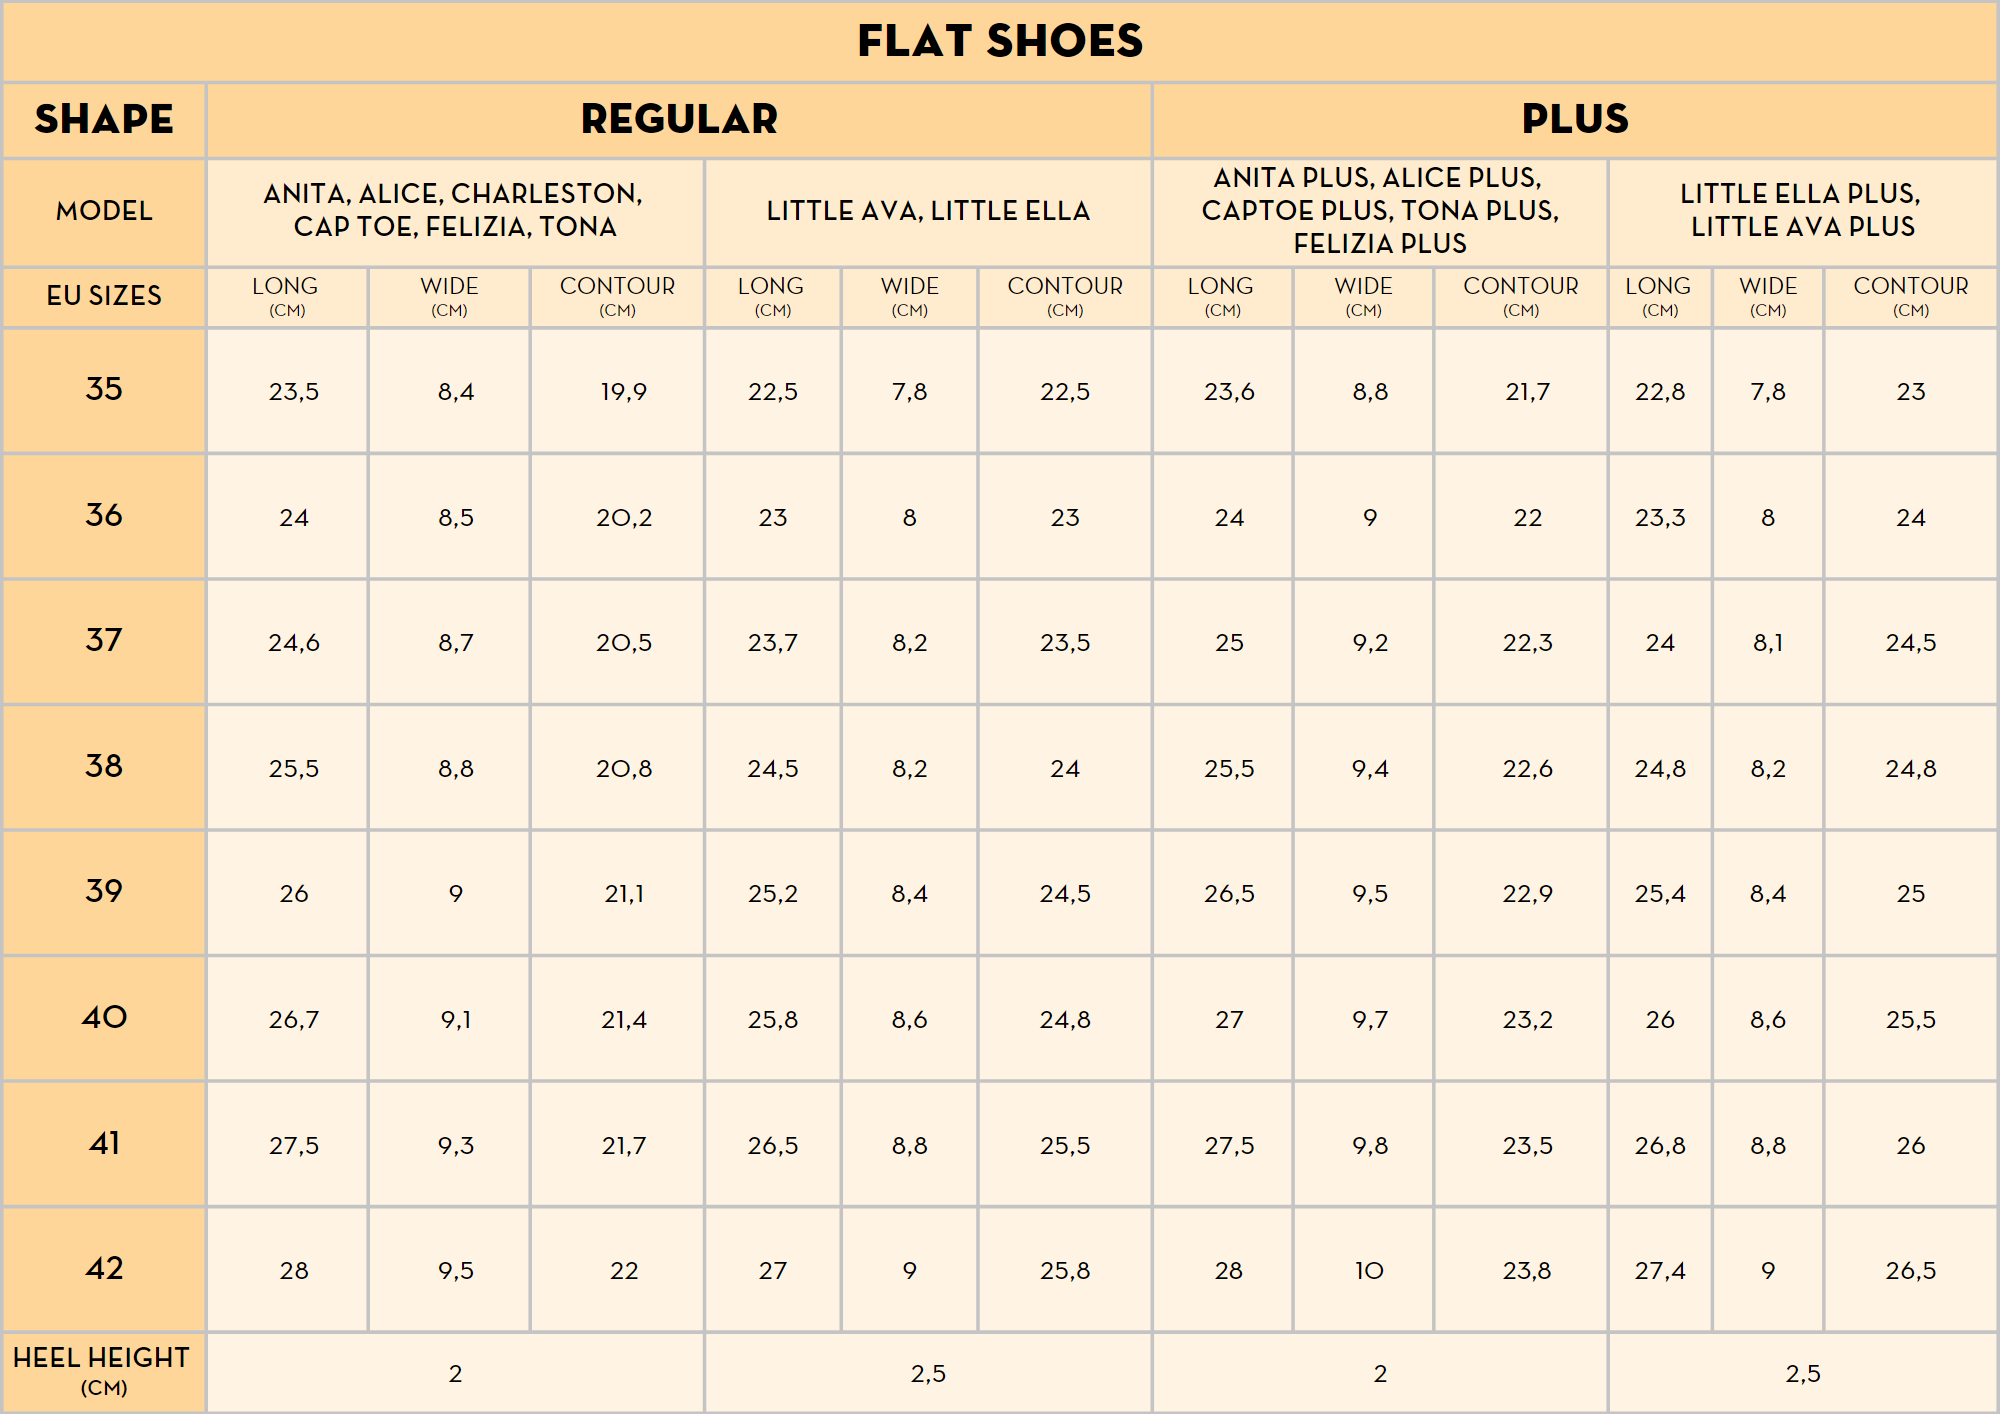 Shoe size in inches - Foot Length to Shoe Size Converter and shoe size chart  in inches